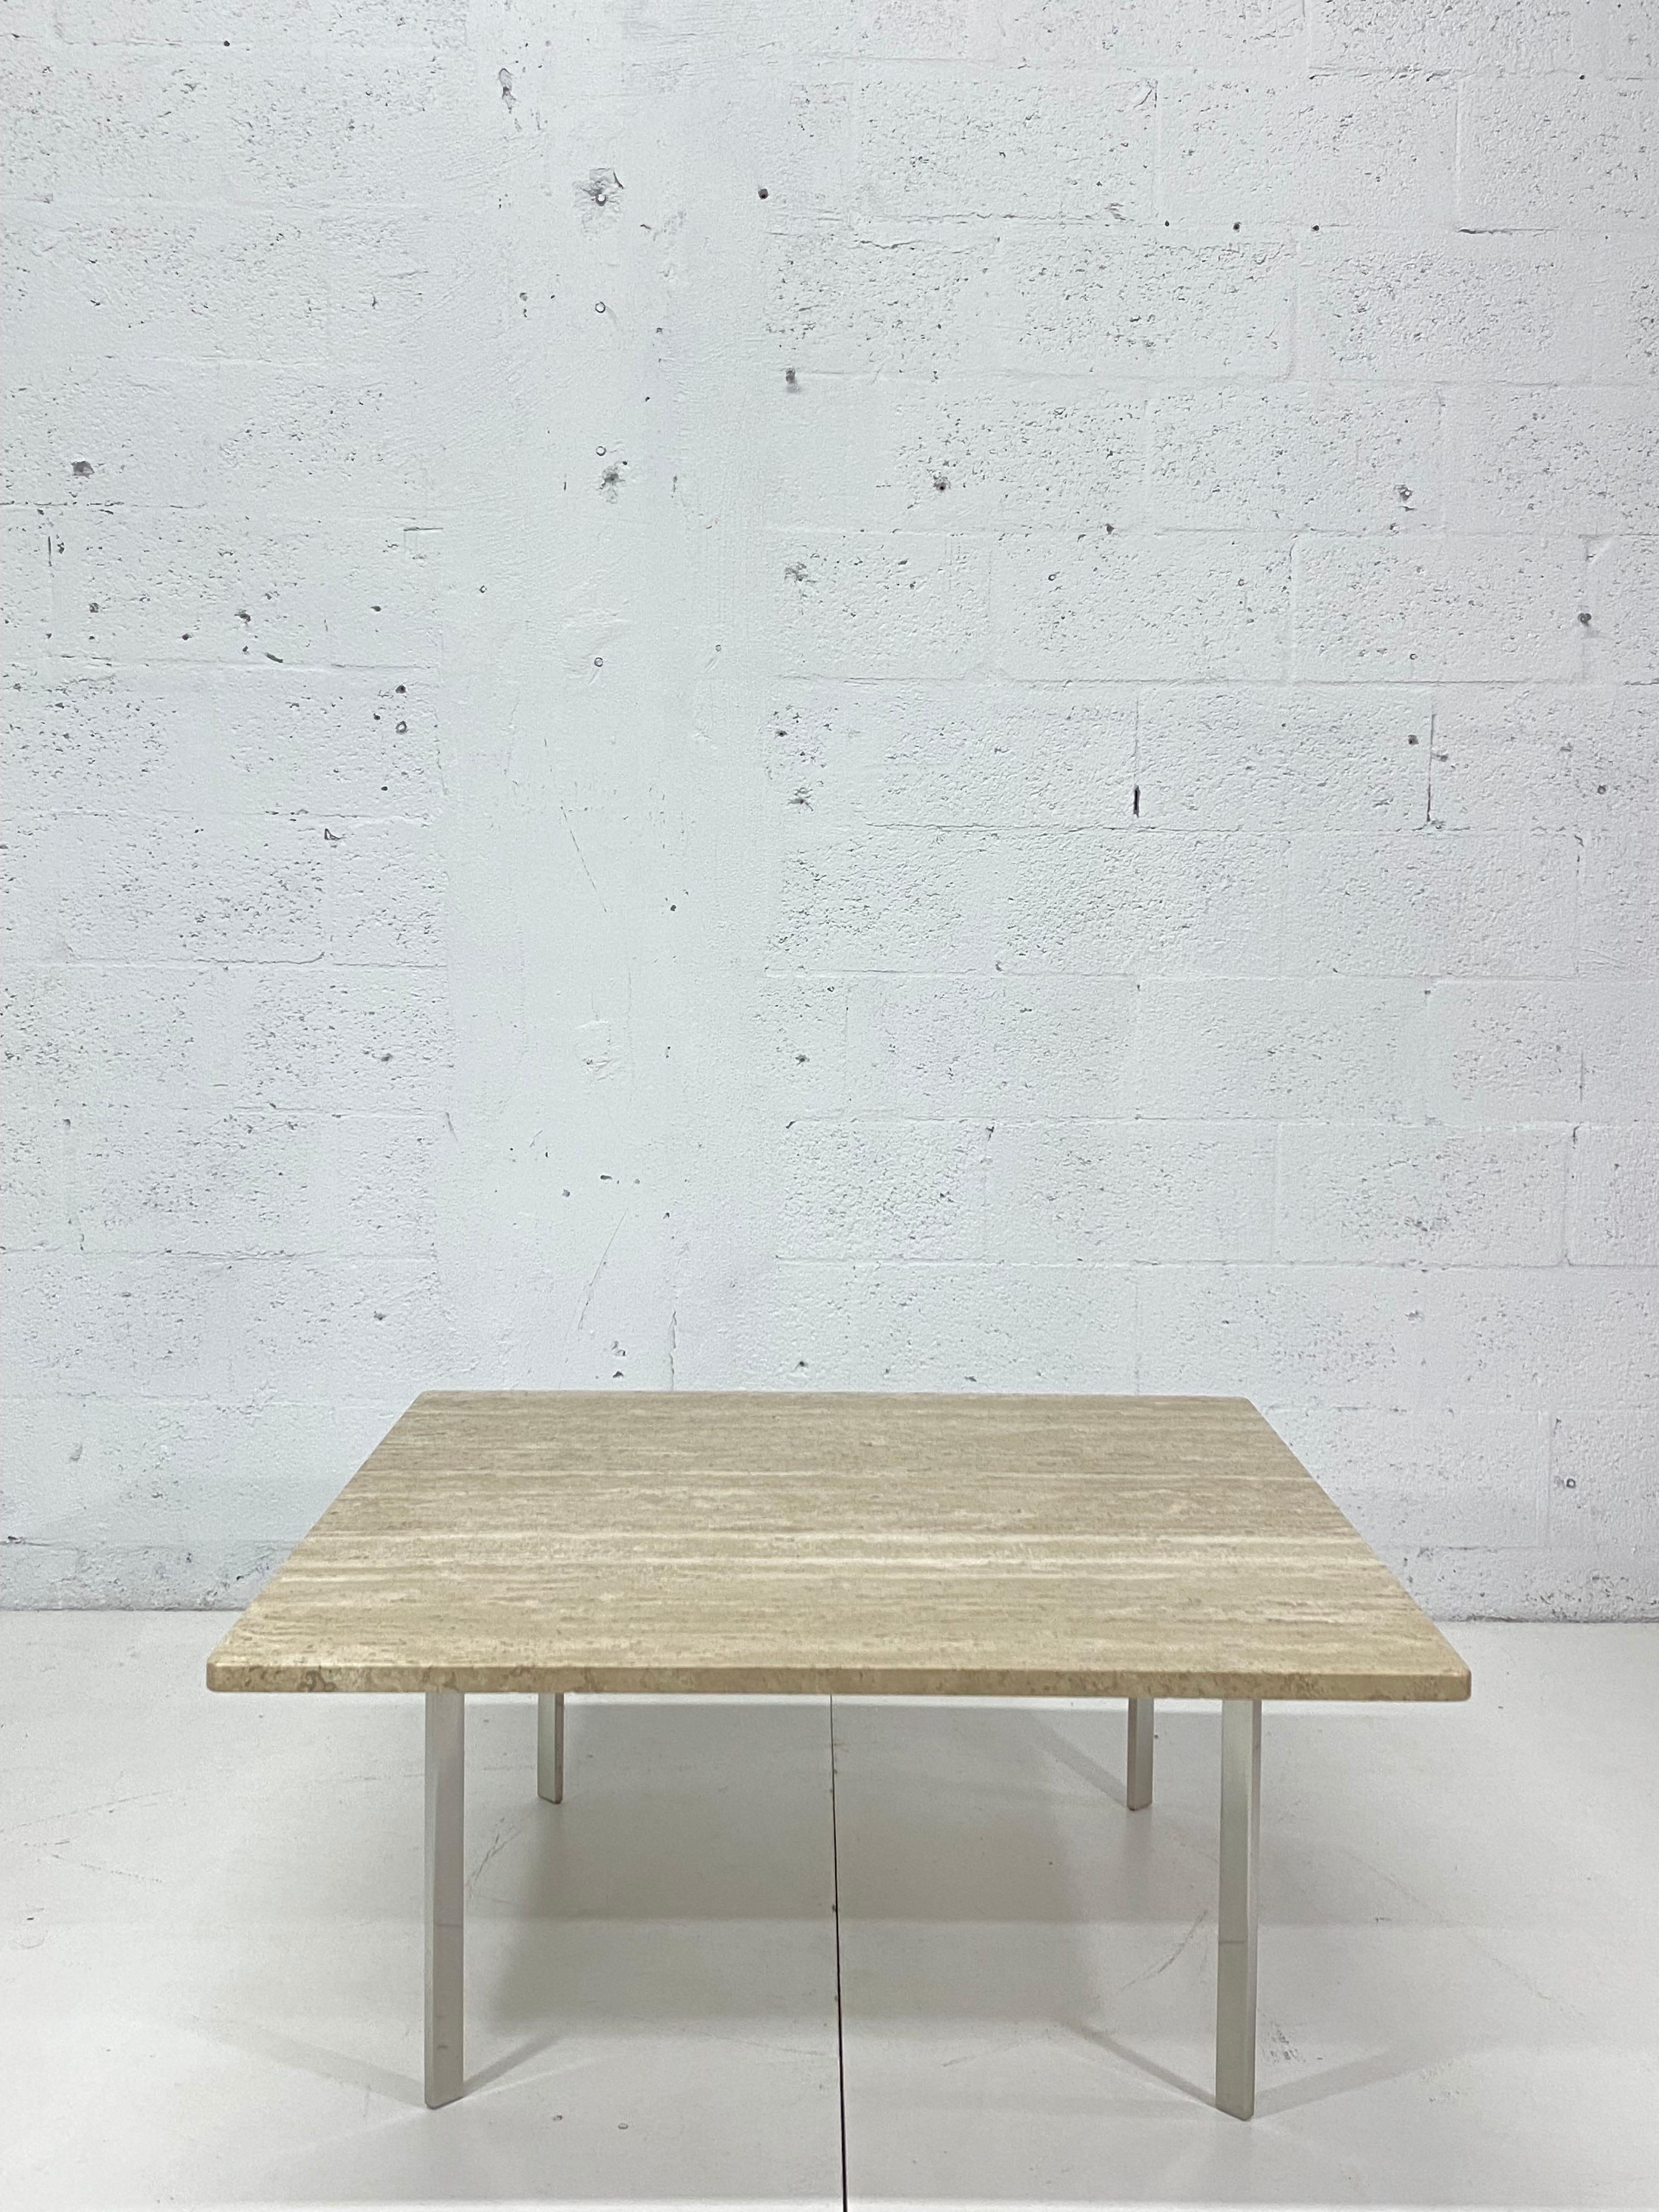 Custom Barcelona table with travertine top and authentic polished chrome steel base by Mies Van Der Rohe for Knoll International. Stamped KP (Knoll Products) under frame; no label on travertine.